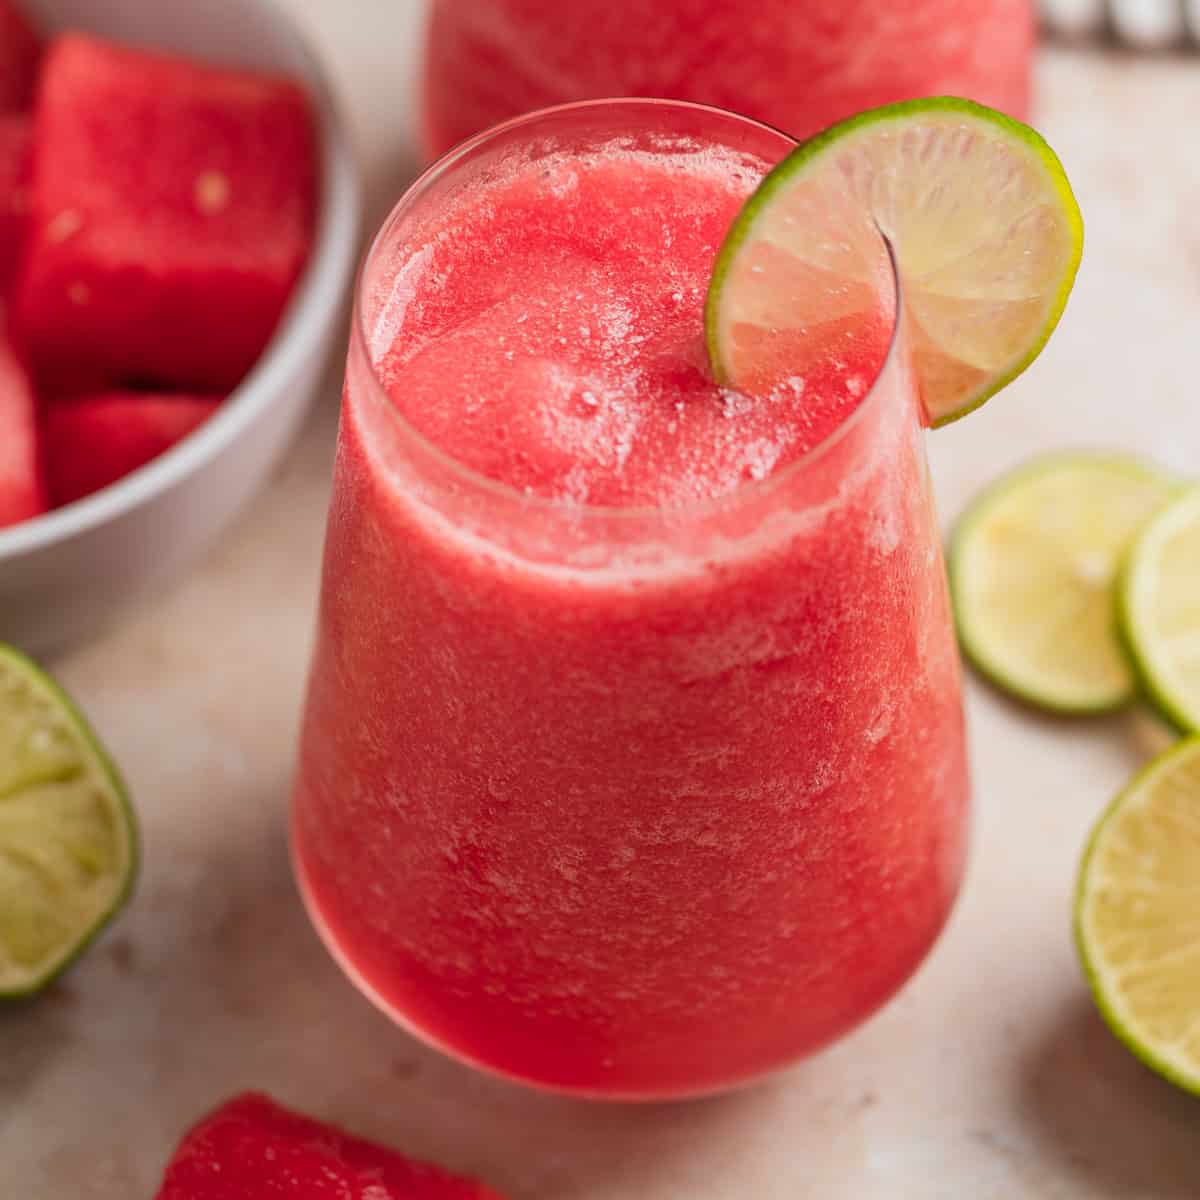 Stemless wine glass with watermelon rosé slushie or frosé with bowl of watermelon behind it as well as lime slices.